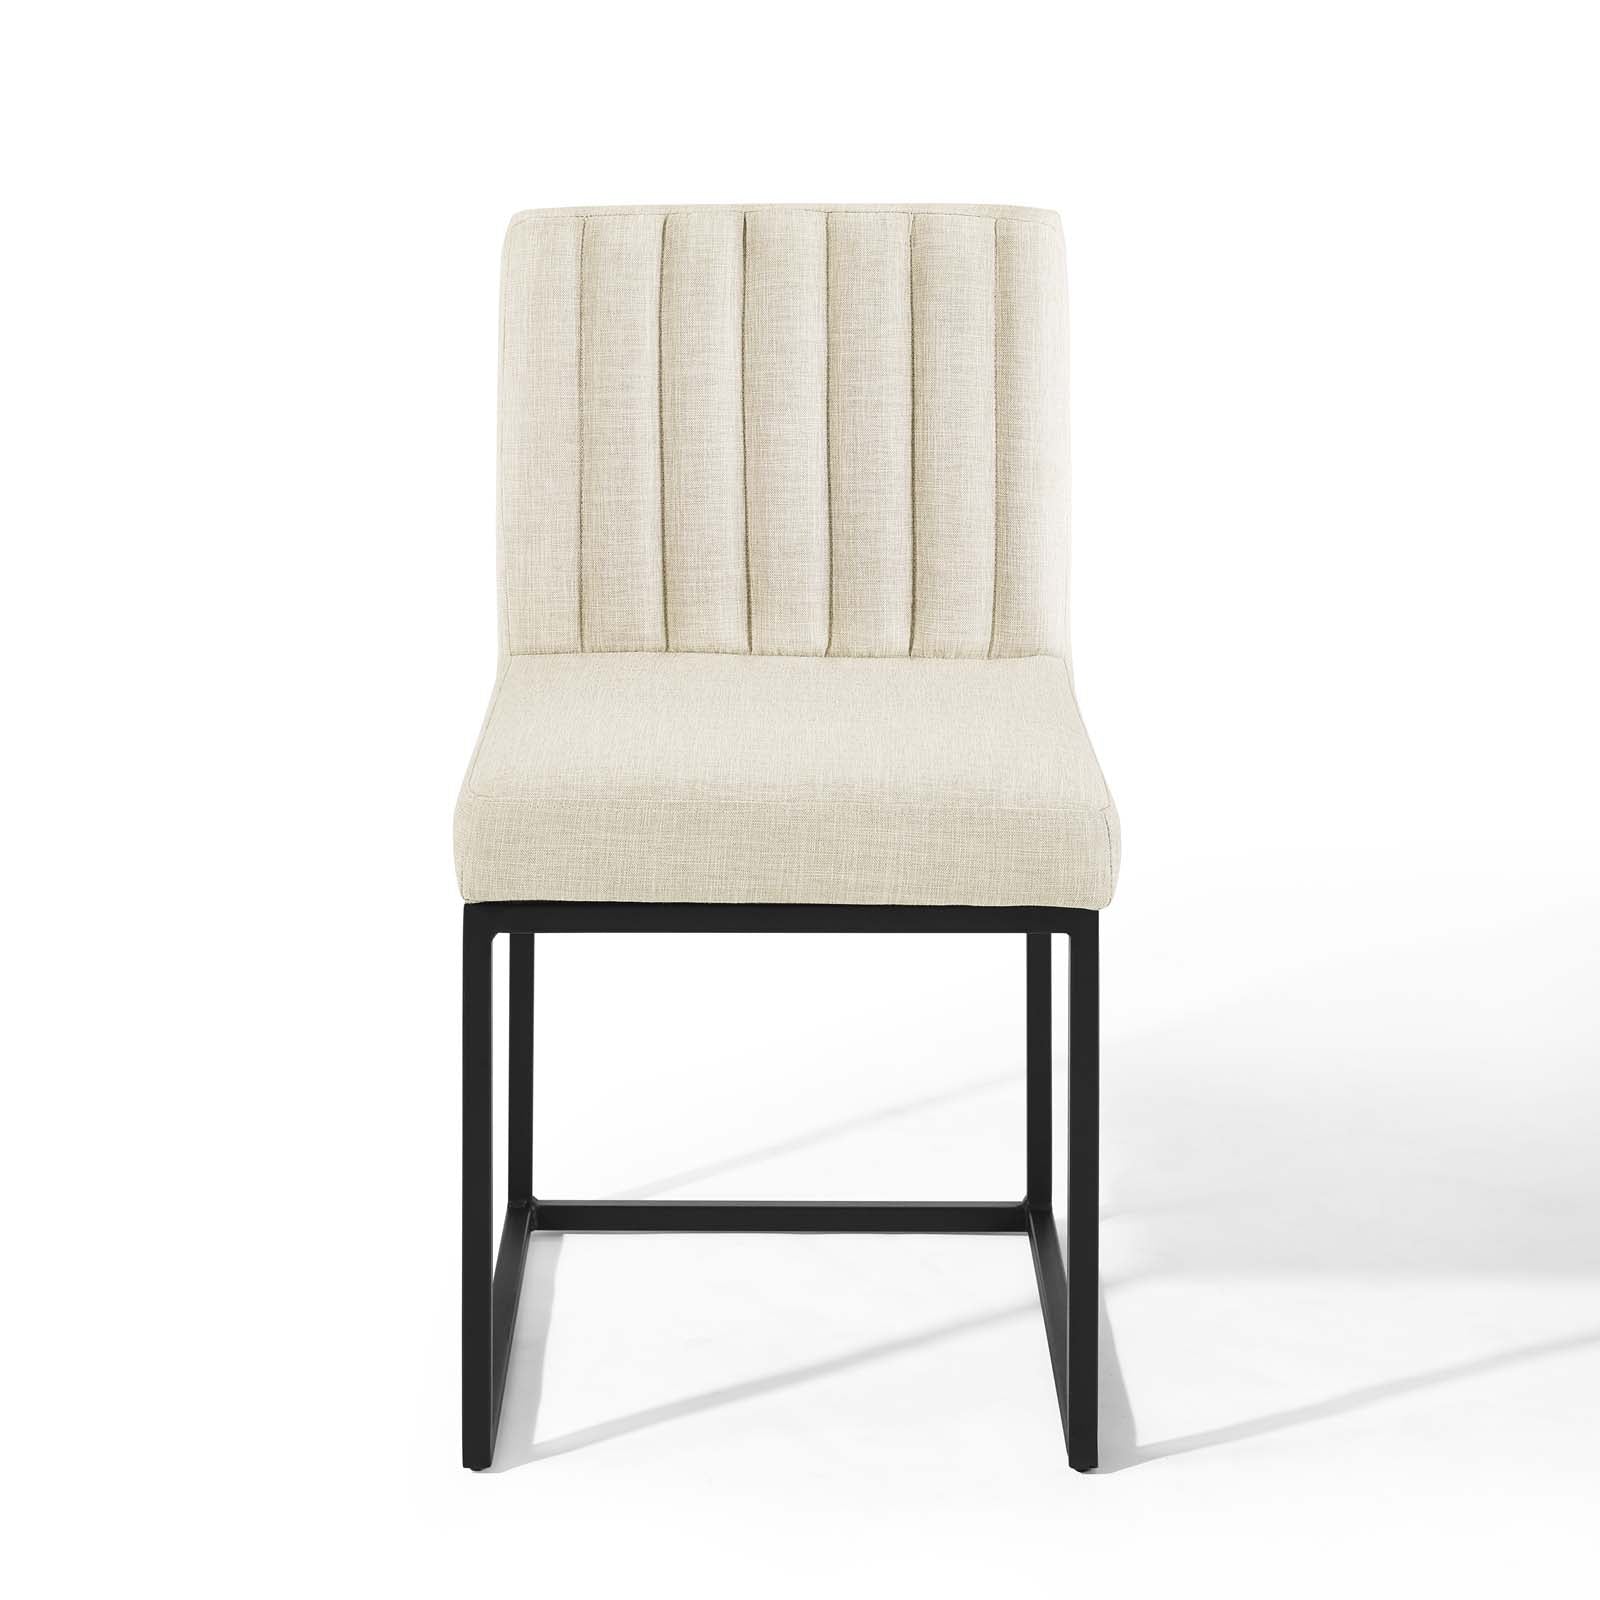 Modway Dining Chairs - Carriage Channel Tufted Sled Base Upholstered Fabric Dining Chair Black Beige